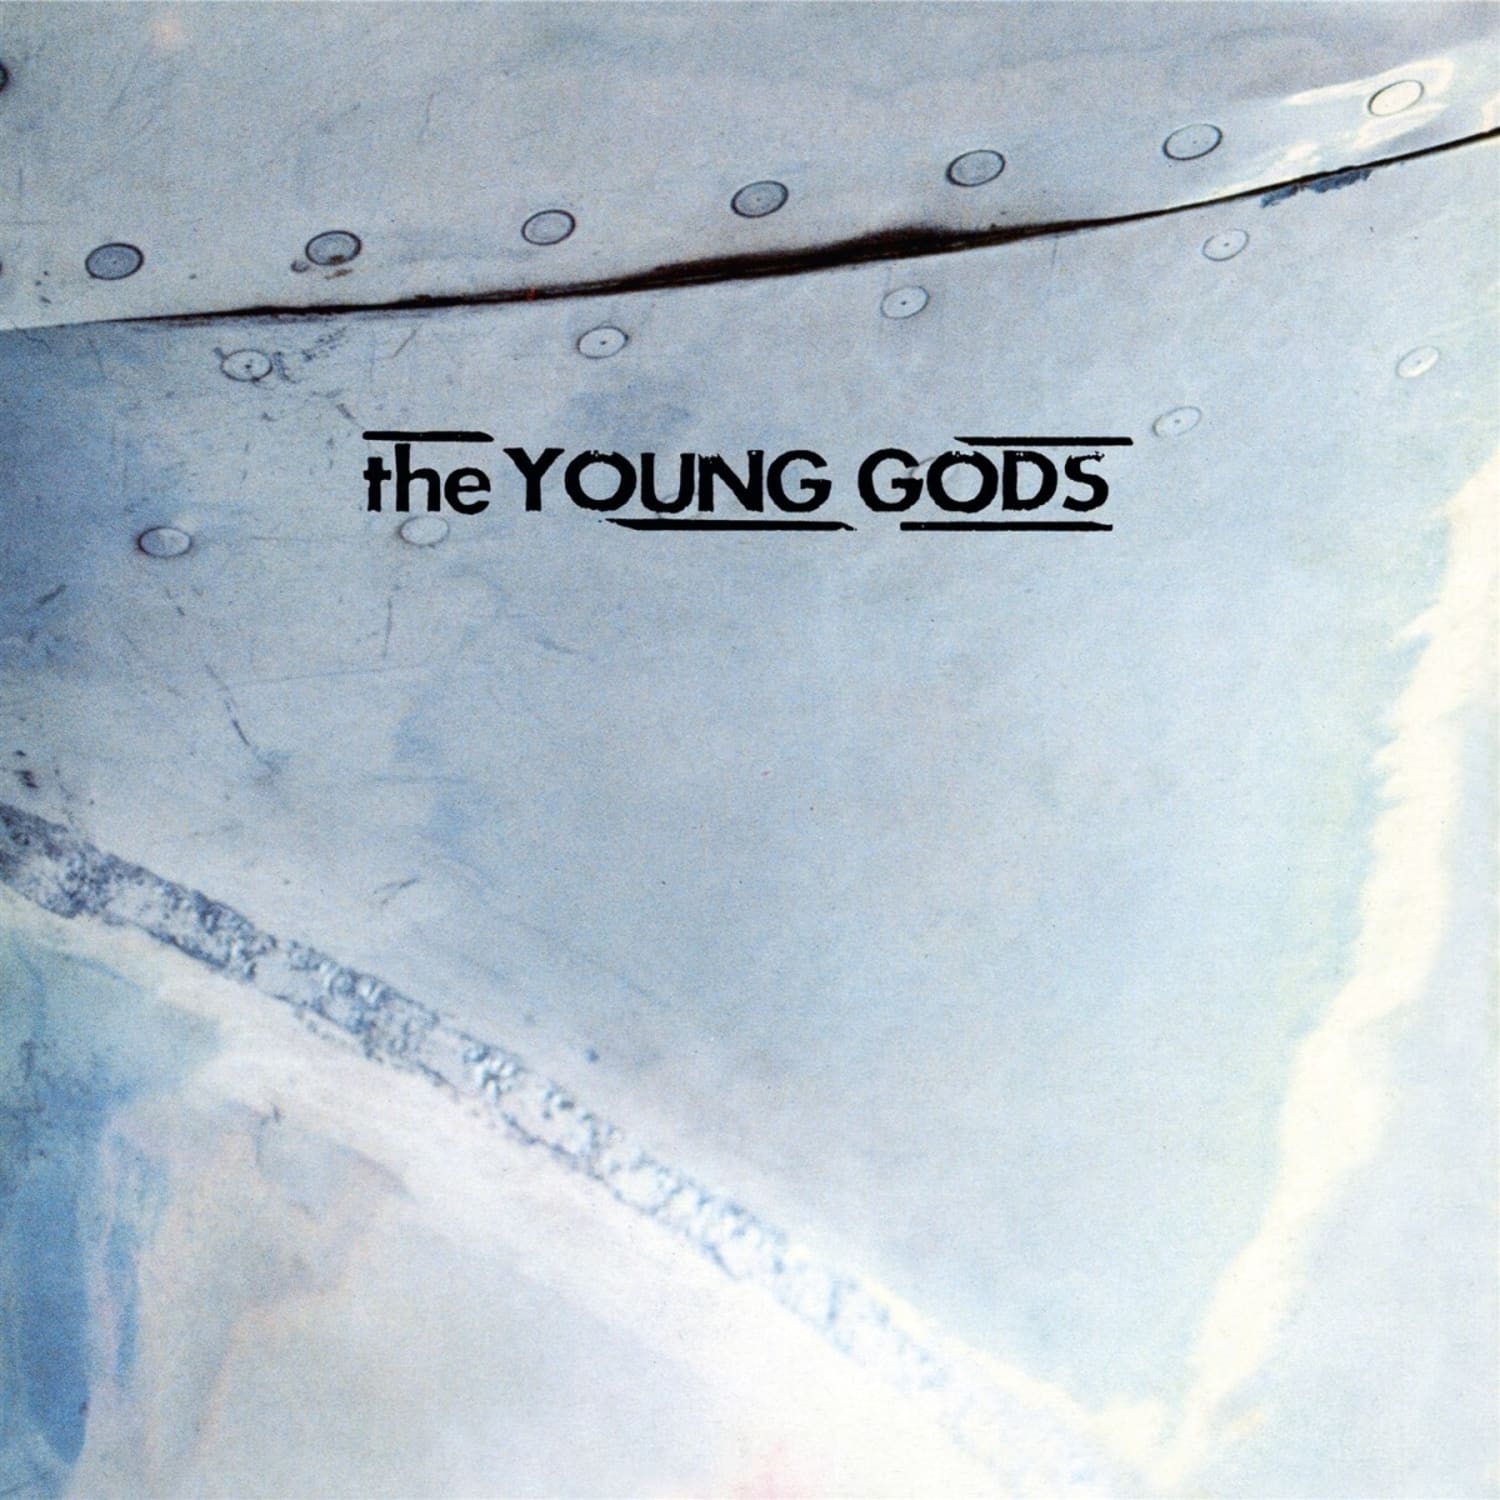  The Young Gods - TV SKY 